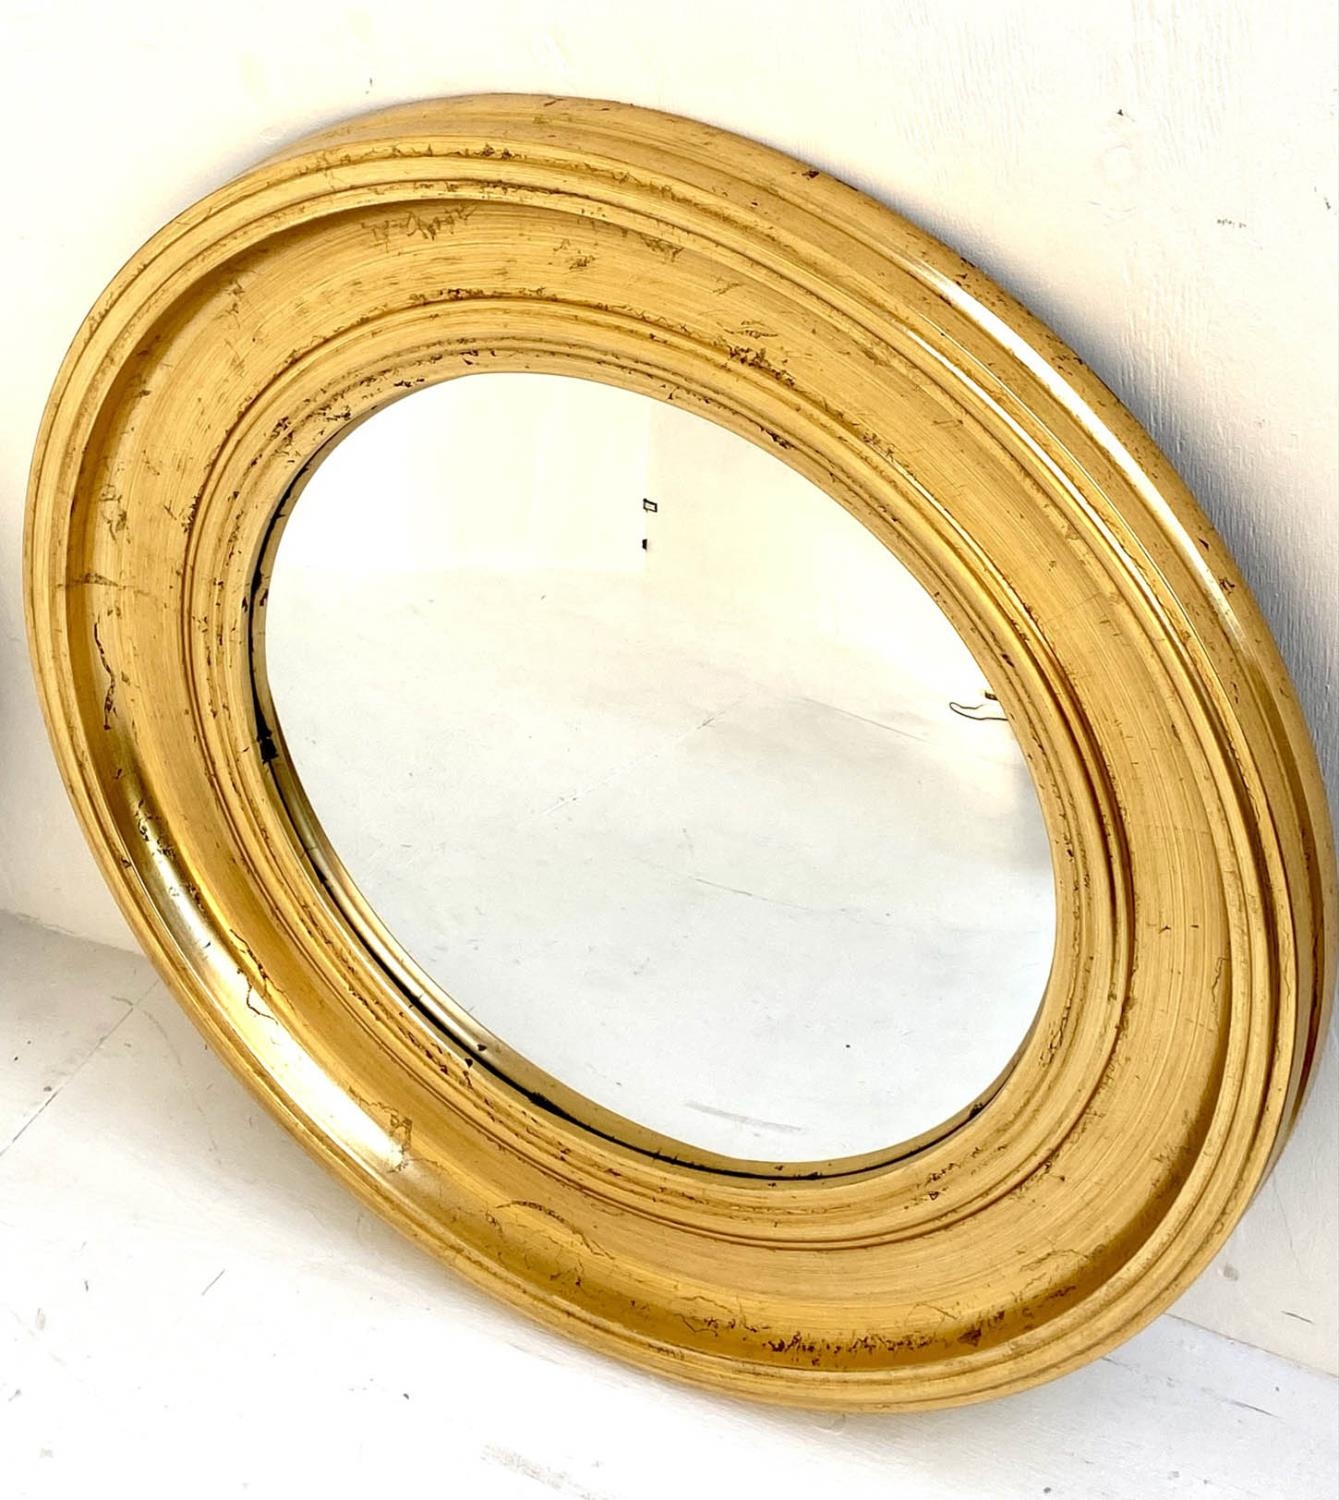 CONVEX BUTLER WALL MIRRORS, a pair, Regency style, gilt frames, 74cm x 74cm. (2) - Image 3 of 3